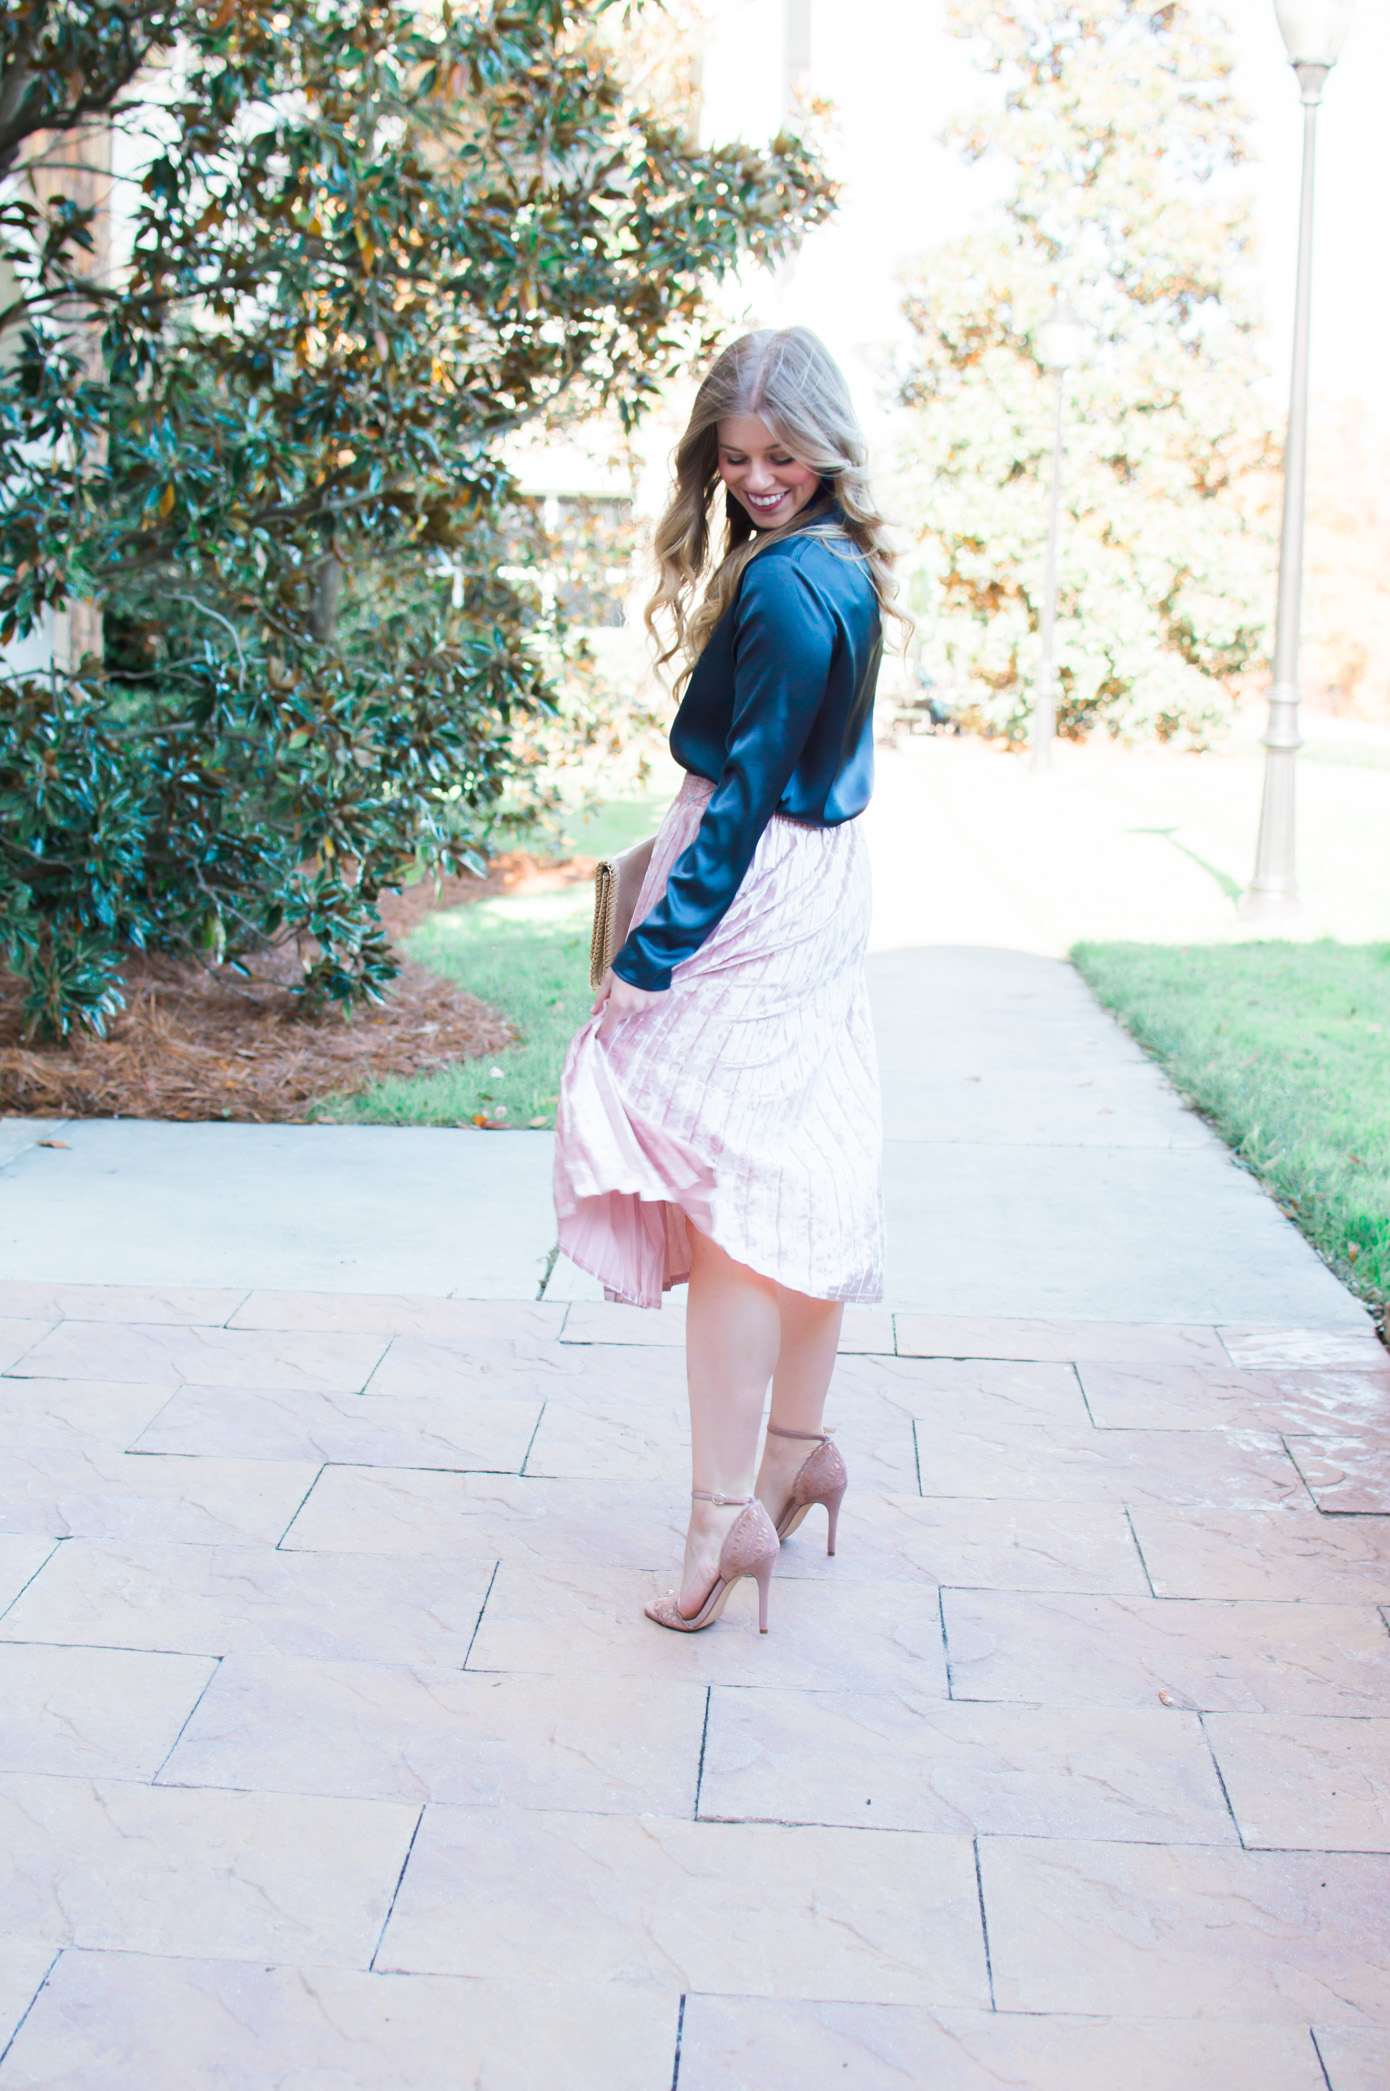 Velvet Midi Skirt | Holiday Party Outfit Idea | Louella Reese Life & Style Blog